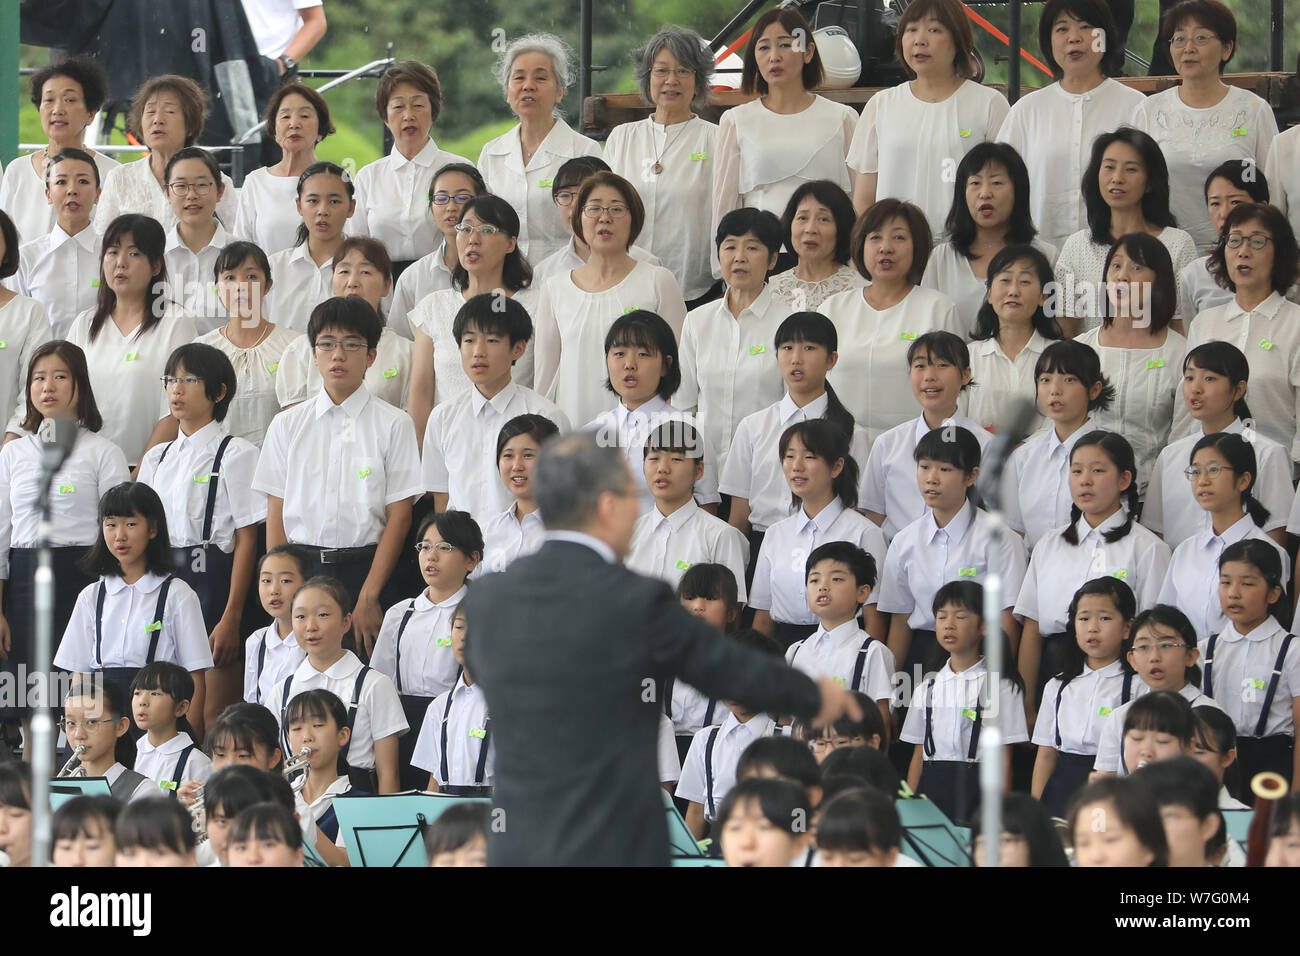 Hiroshima, Japan. 6th Aug, 2019. People sing as they attend an annual memorial ceremony in Hiroshima, Japan, Aug. 6, 2019. Hiroshima, a Japanese city hit by a U.S. atomic bomb at the end of World War II, marked the 74th anniversary of the bombing on Tuesday. Credit: Du Xiaoyi/Xinhua/Alamy Live News Stock Photo